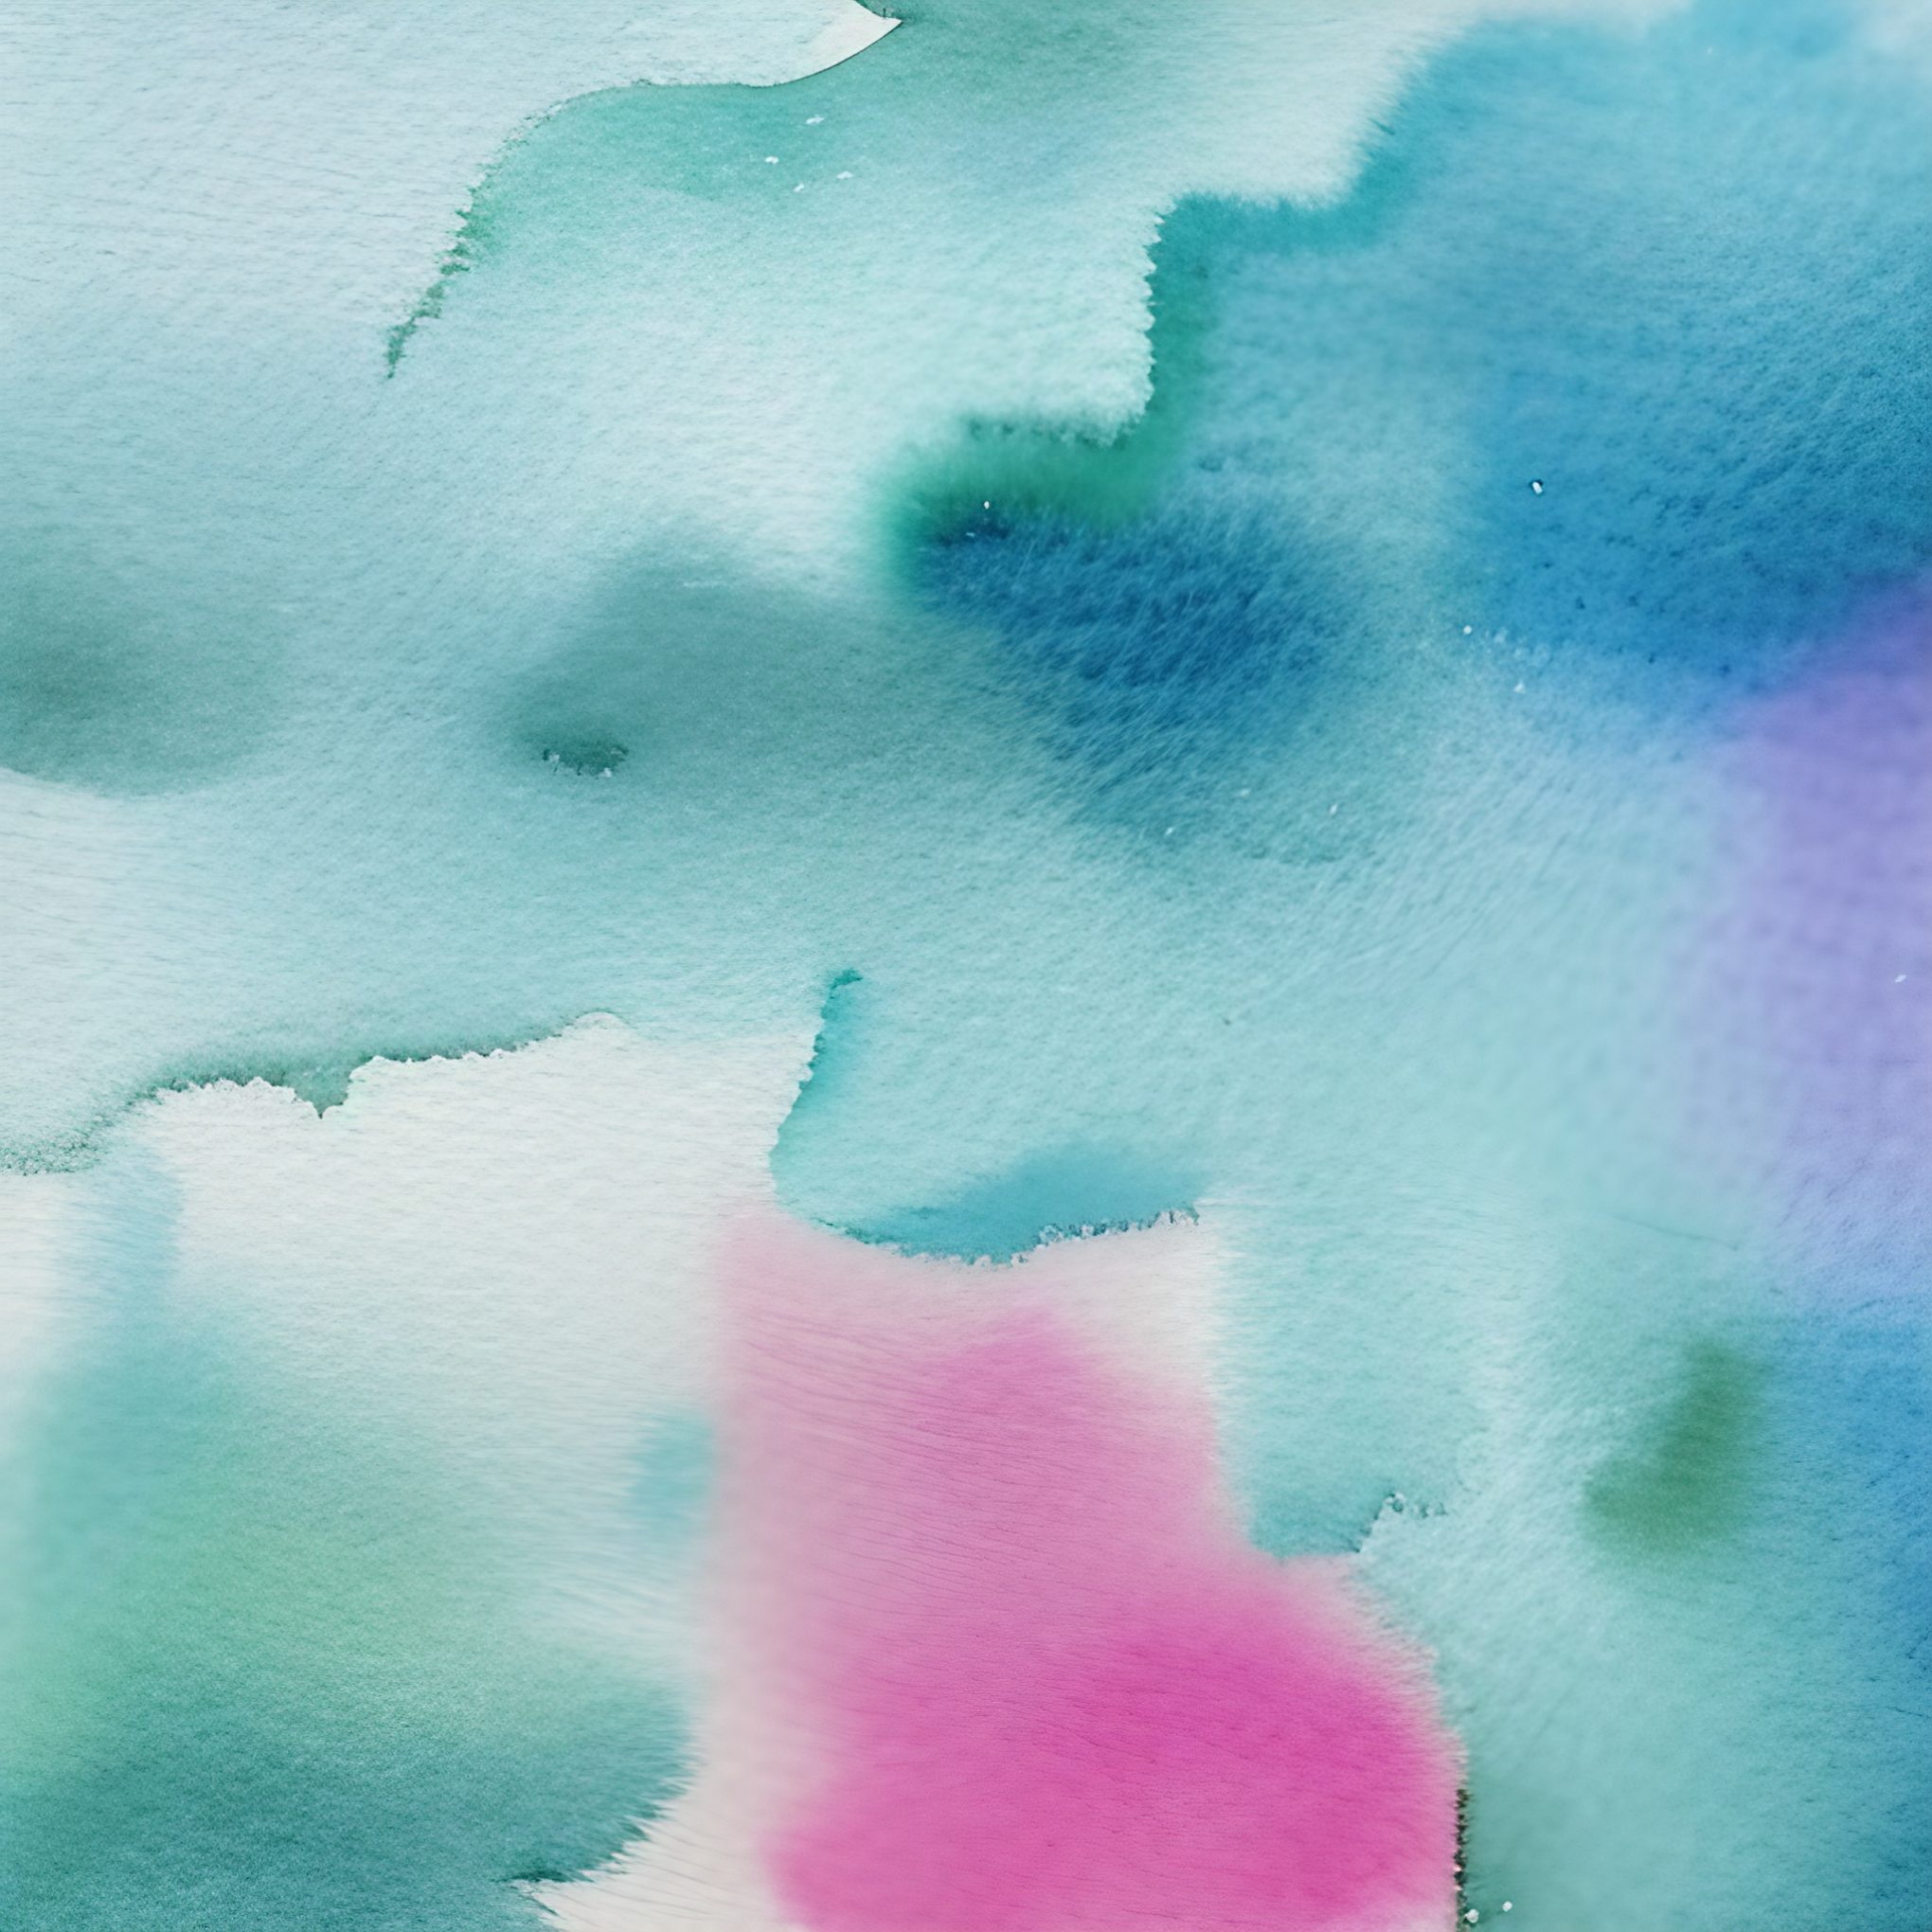 Teal and Pink Watercolor Texture Free Stock Image